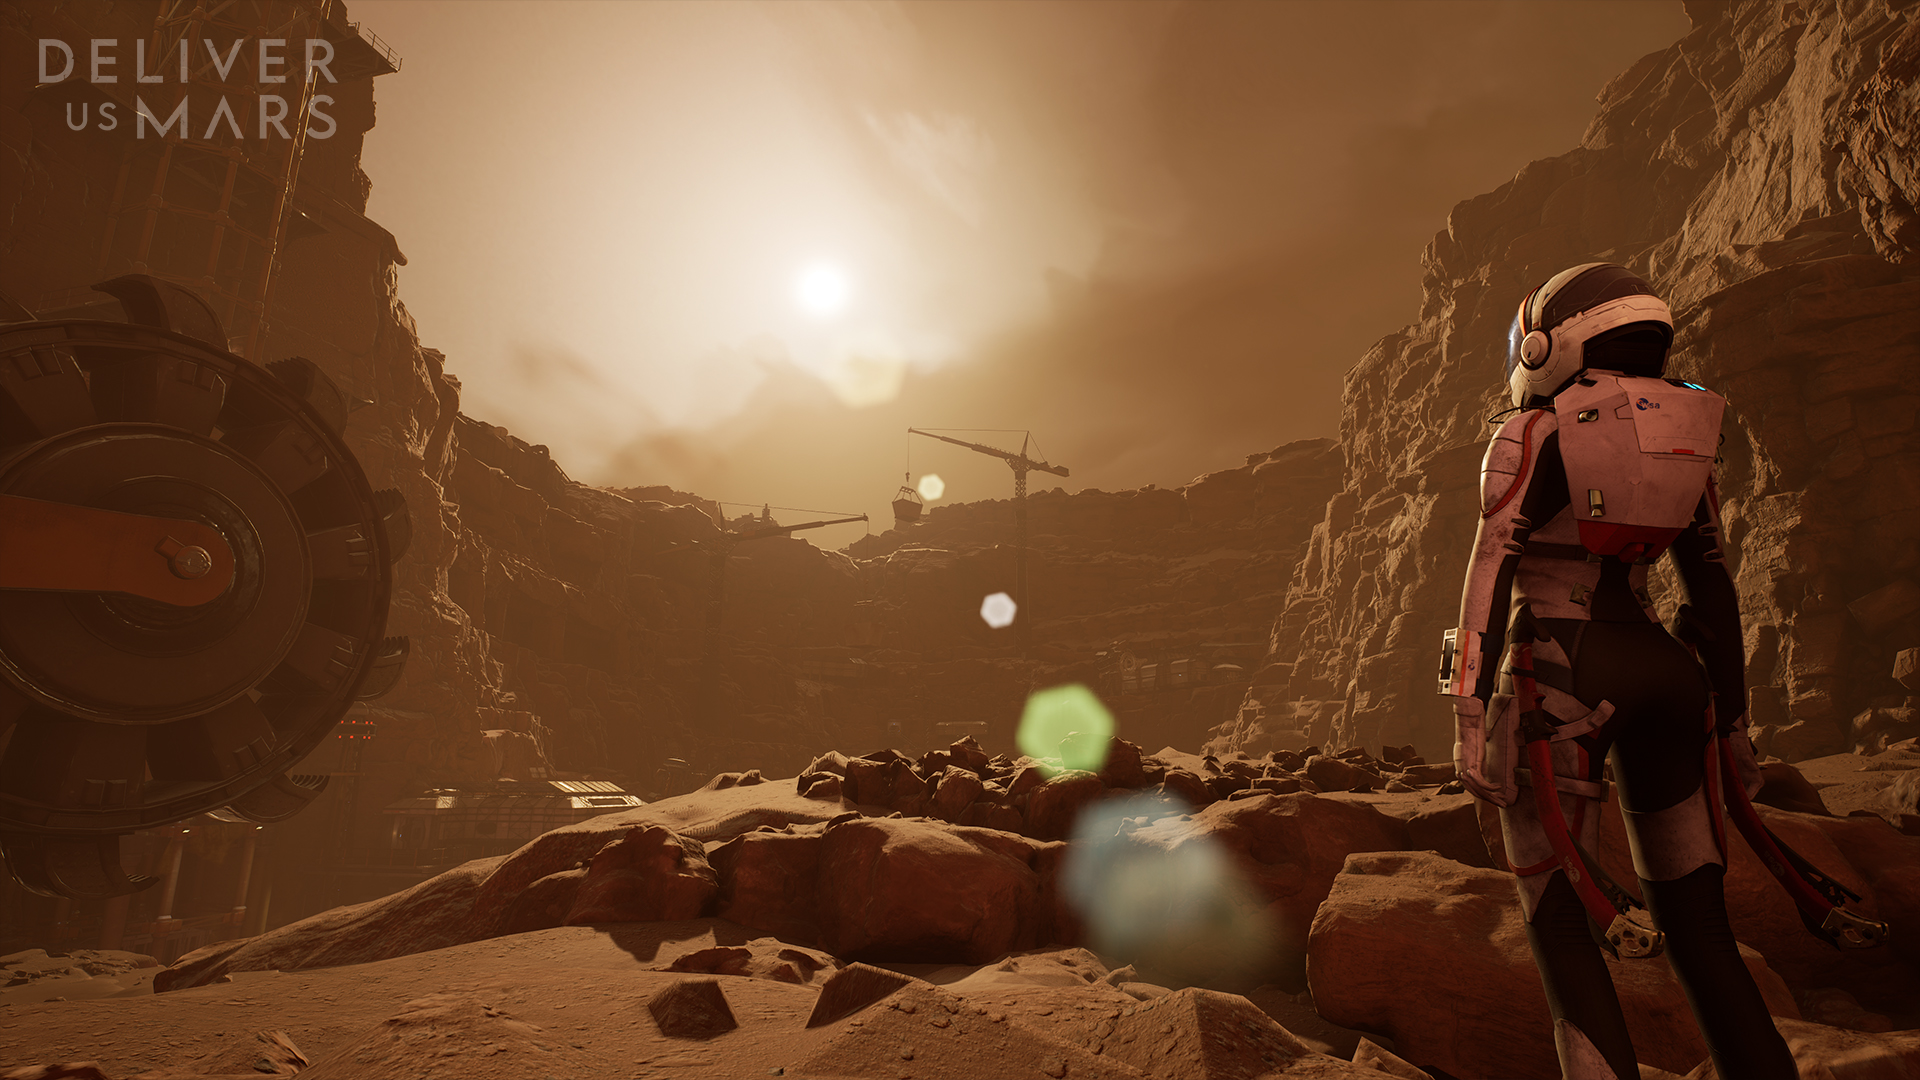 Take The Journey Of A Lifetime In Deliver Us Mars, Out Today On Xbox Series X|S and Xbox One